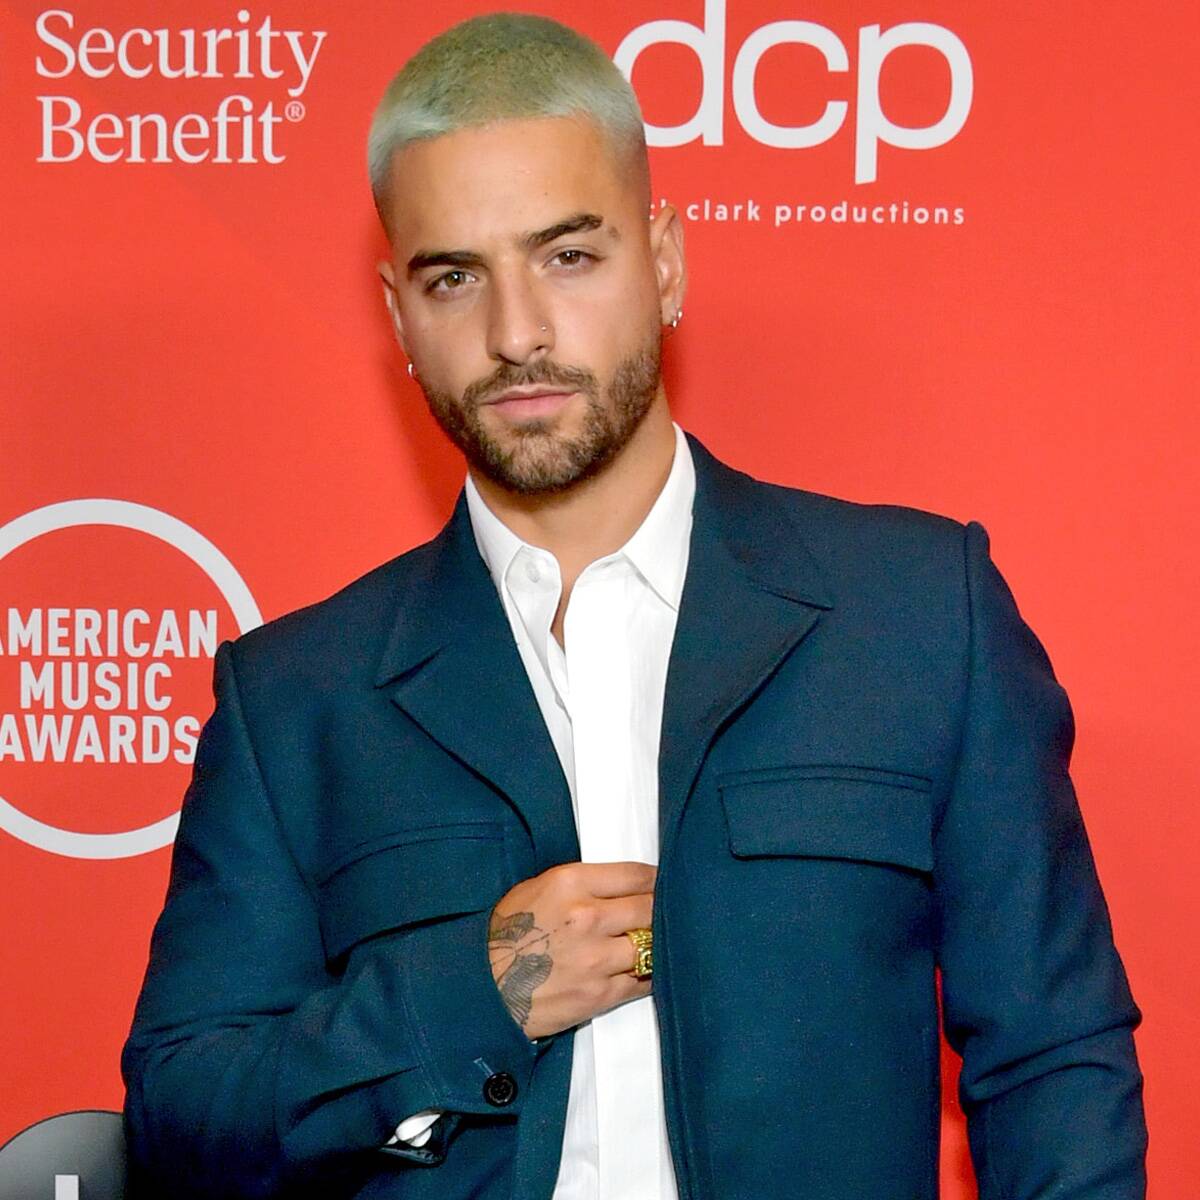 Why Maluma Says It's "Very Hard" for Him to Make Friends in the Music Industry